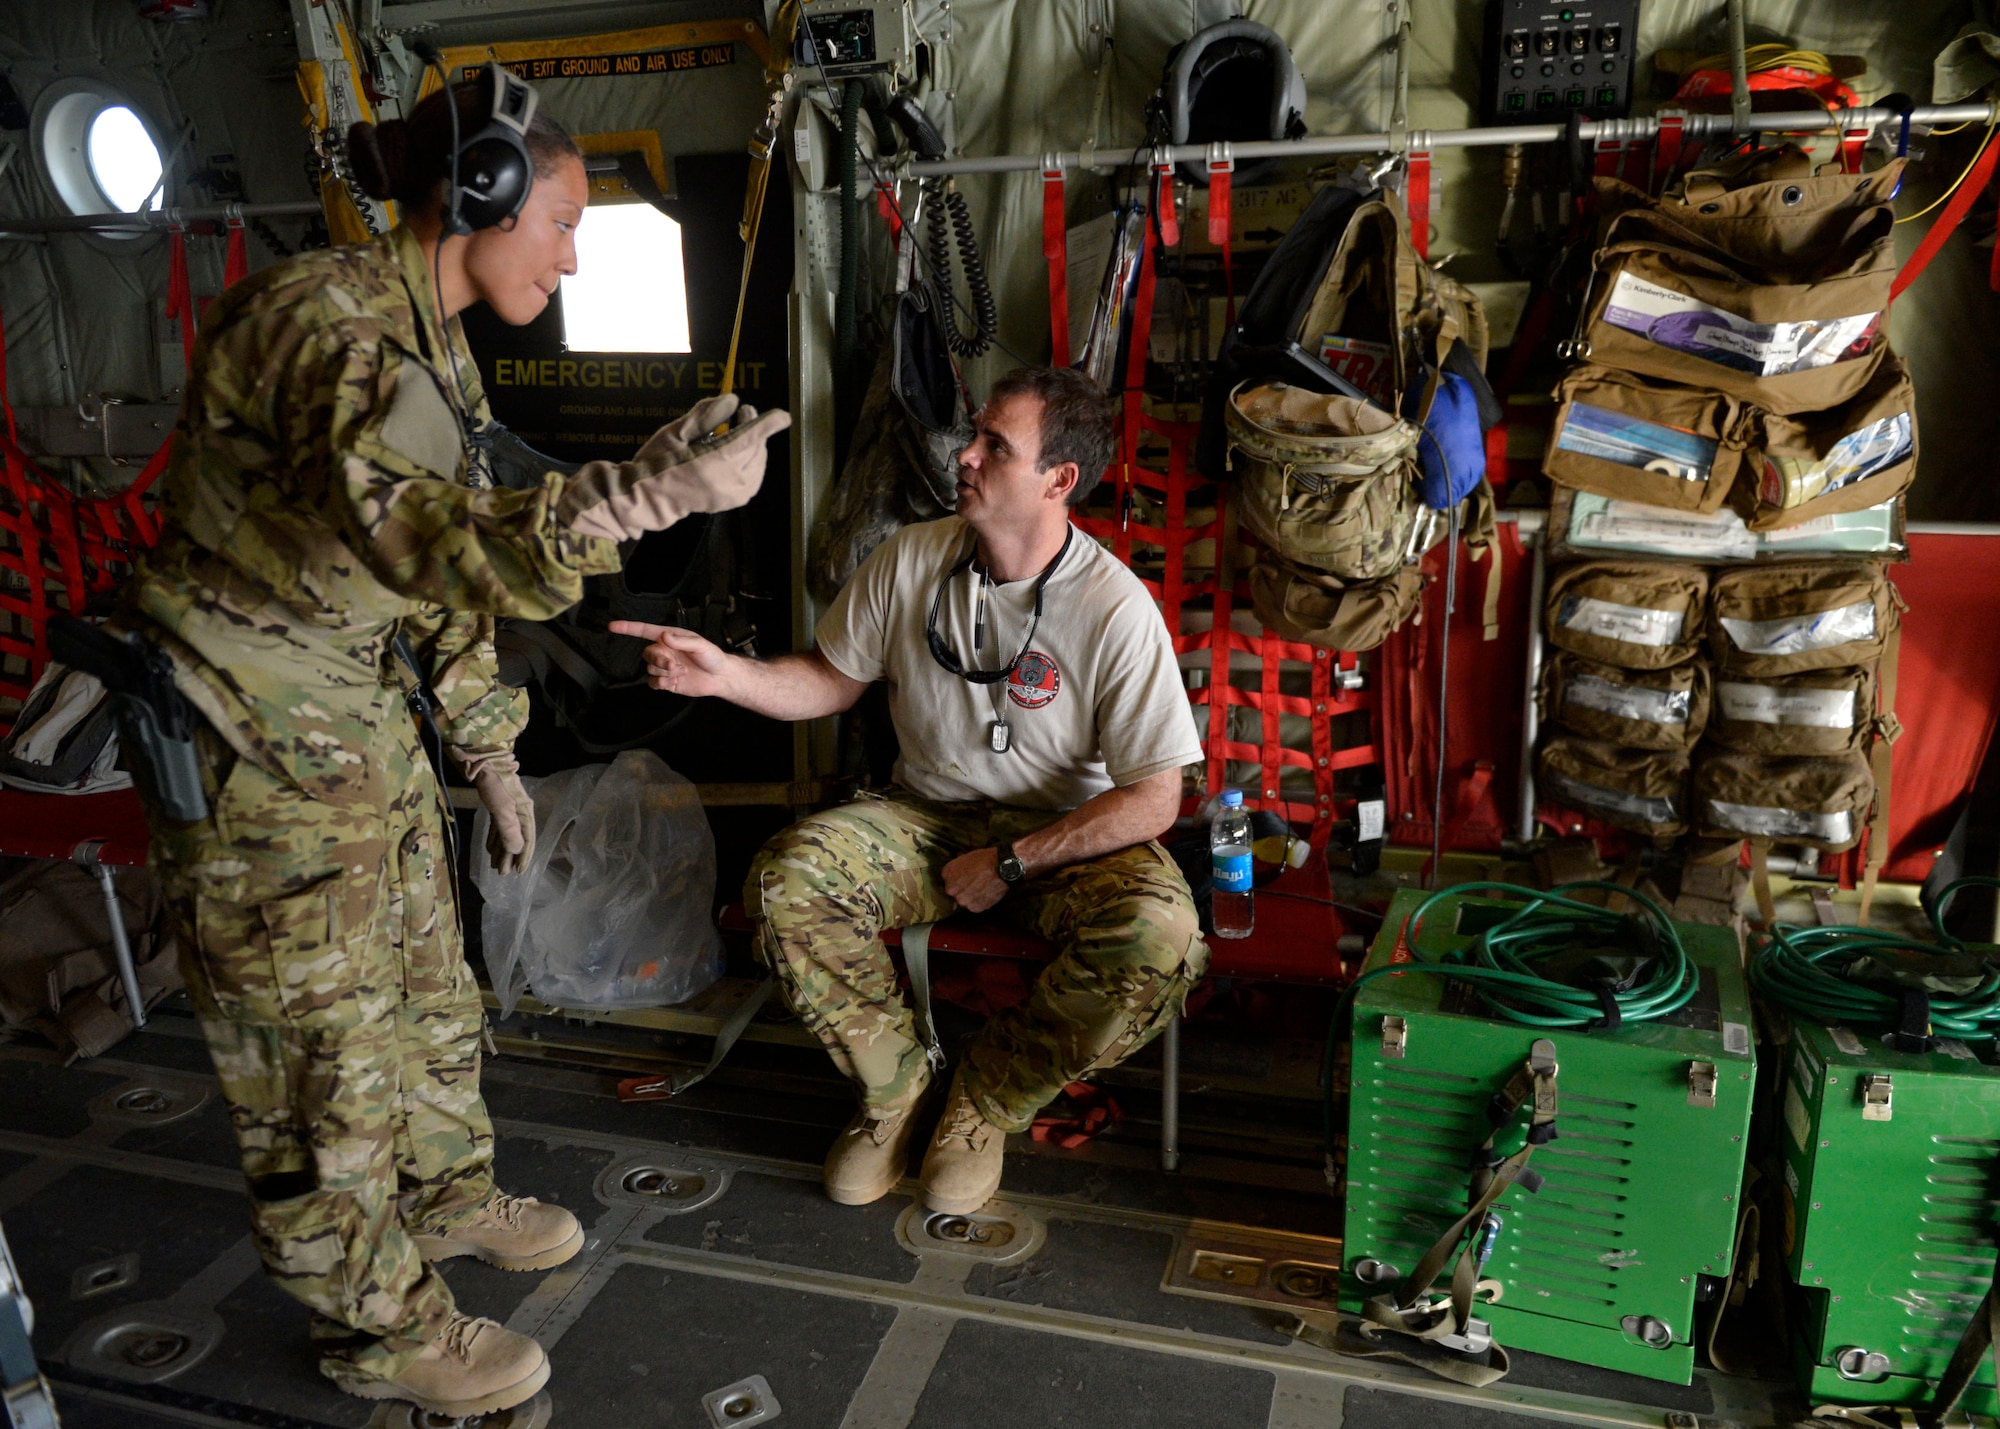 (From left) U.S. Air Force Capts. Cheryl Fowler and Chad Moore, 455th  Expeditionary Aeromedical Evacuation Squadron discuss flight details during a aeromedical evacuation mission at Kandahar Airfield, Afghanistan May 29, 2014.  The Aeromedical Evacuation squadron transports and treats ill and injured personnel throughout Afghanistan. The unit uses fixed-wing aircraft such as the C-130J Super Hercules, which allows larger patient loads, long-distance transportation and a greater ability to care for injured members. Fowler is a flight nurse delpoyed from Peterson Air Force Base, Colo. and a native Watertown S.D.  Moore is a Critical Care Air Transport Team nurse deployed from Wright-Patterson Air Force Base, Ohio. and a native of New Brockton, Ala. (U.S. Air Force photo by Staff Sgt. Evelyn Chavez/Released)  